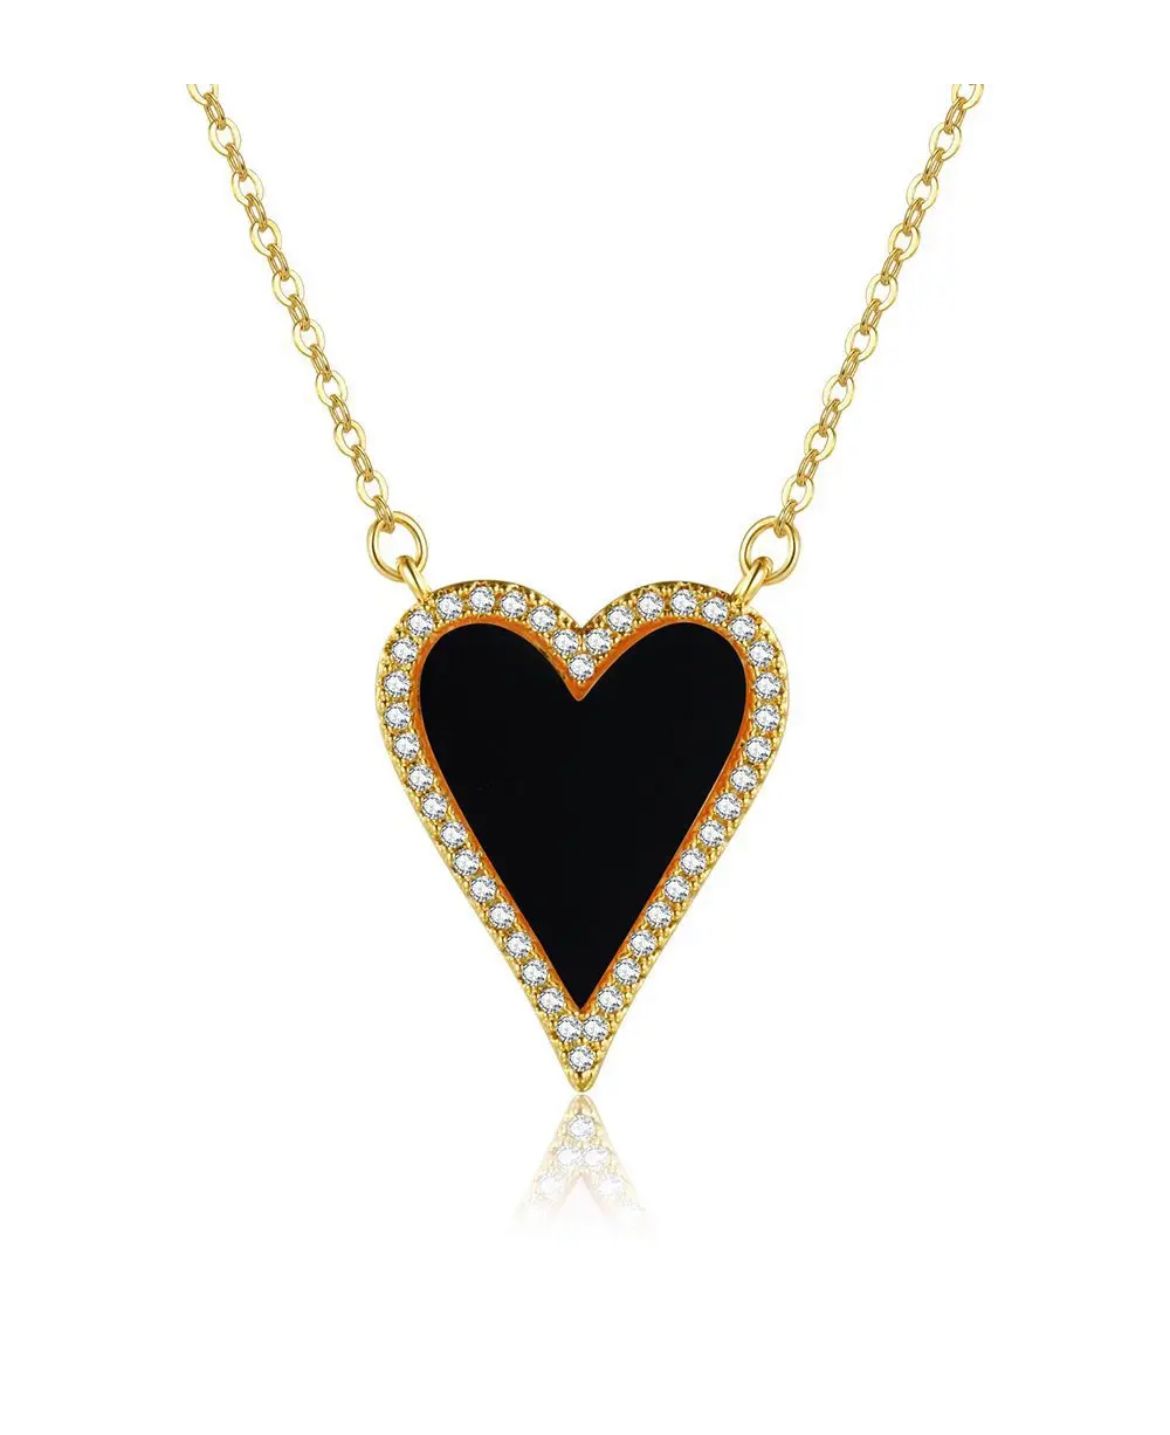 Love at First Sight Necklace